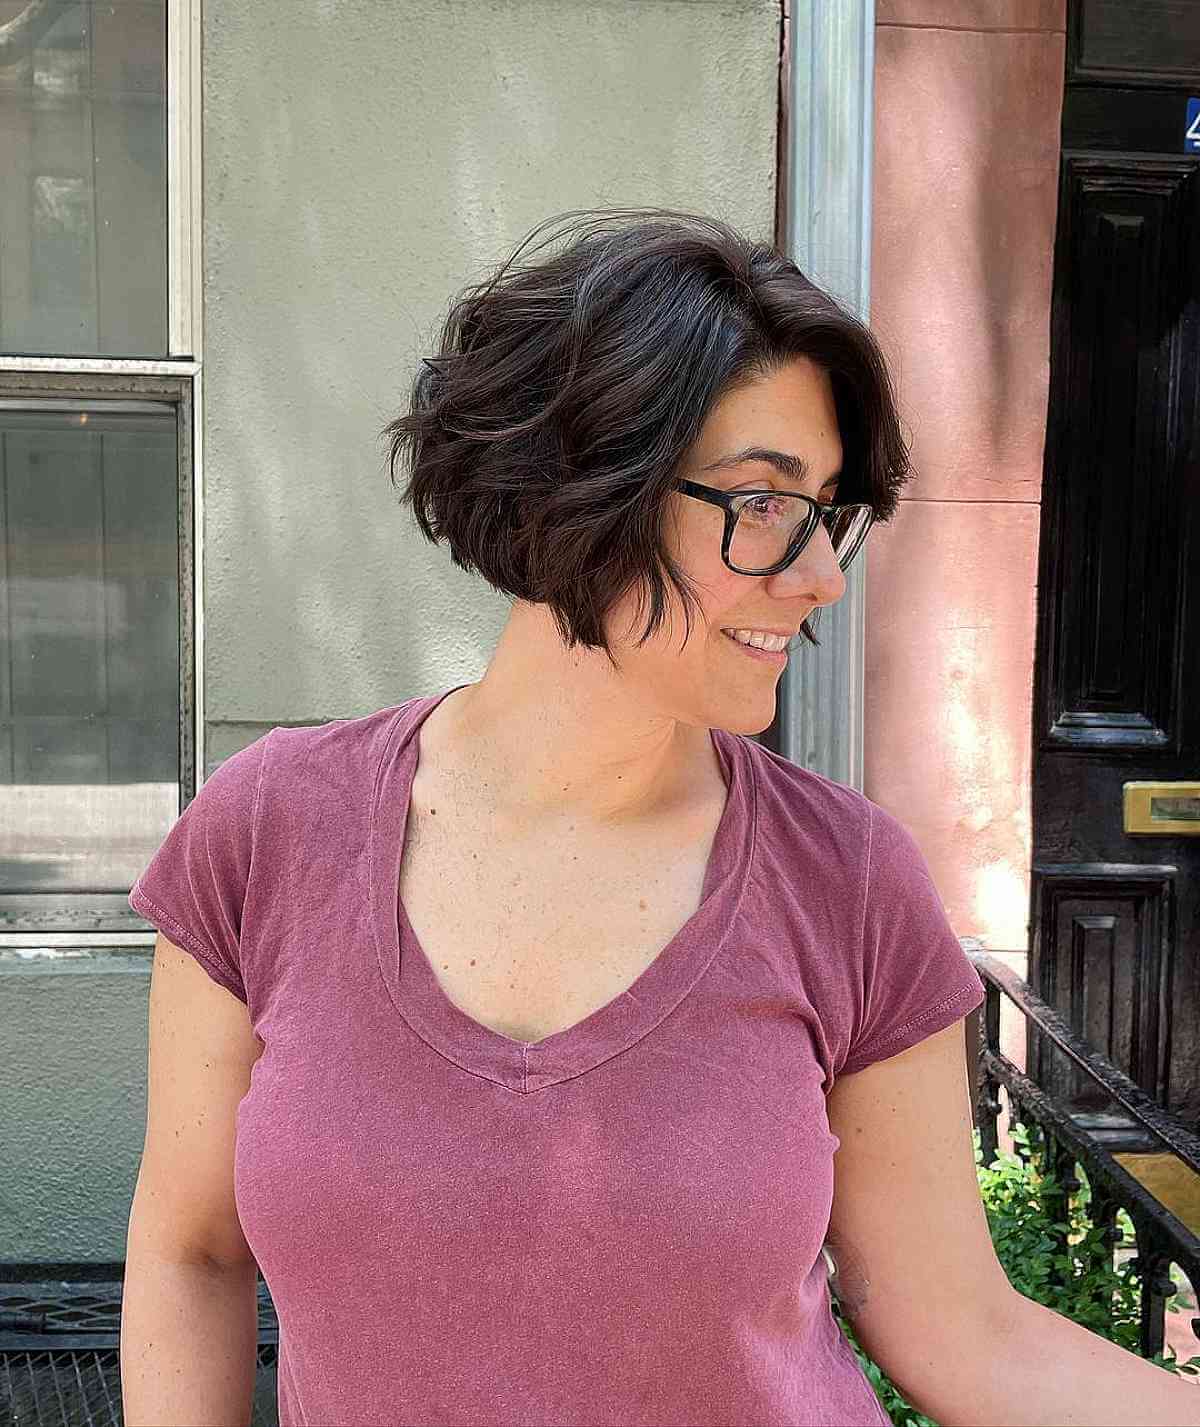 16 Edgy Jaw-Length Choppy Bobs Women Are Getting Right Now